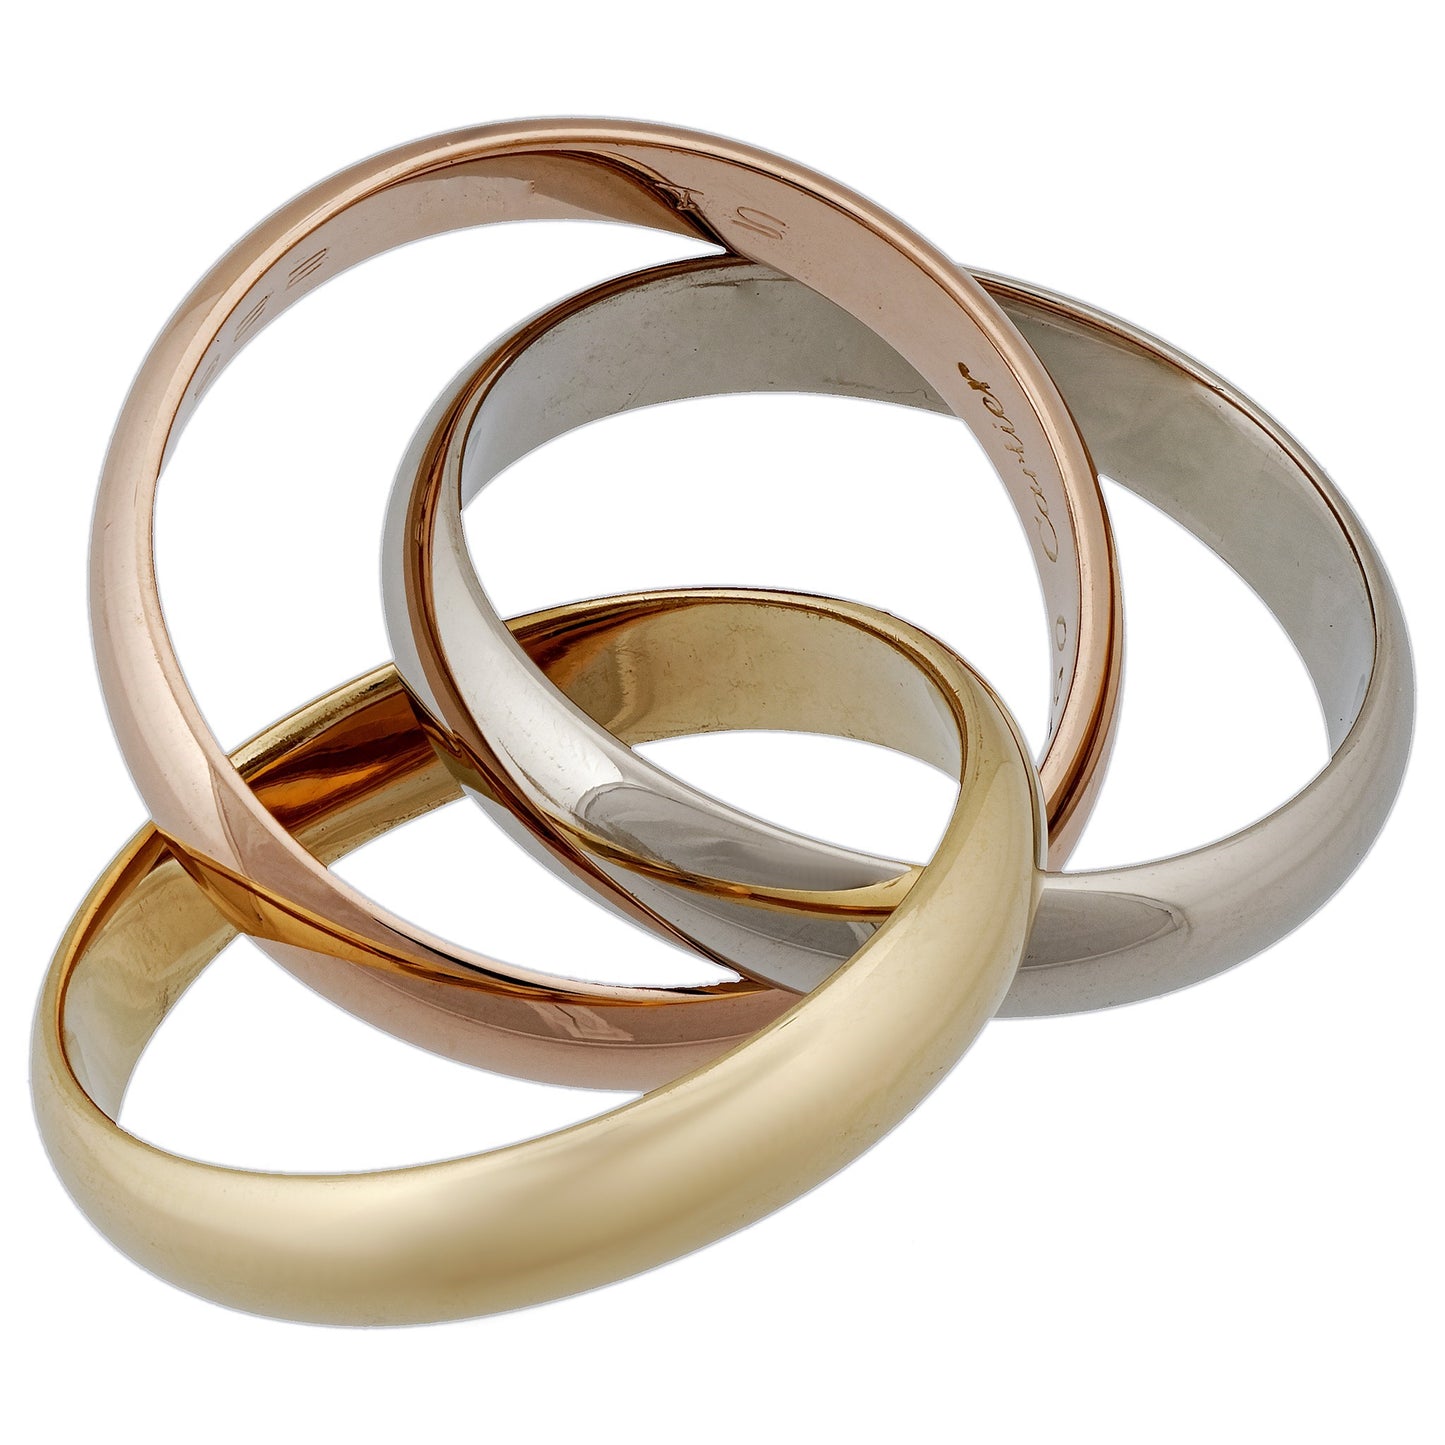 Cartier 18K Yellow, White and Rose Gold Trinity Ring Size 5.75